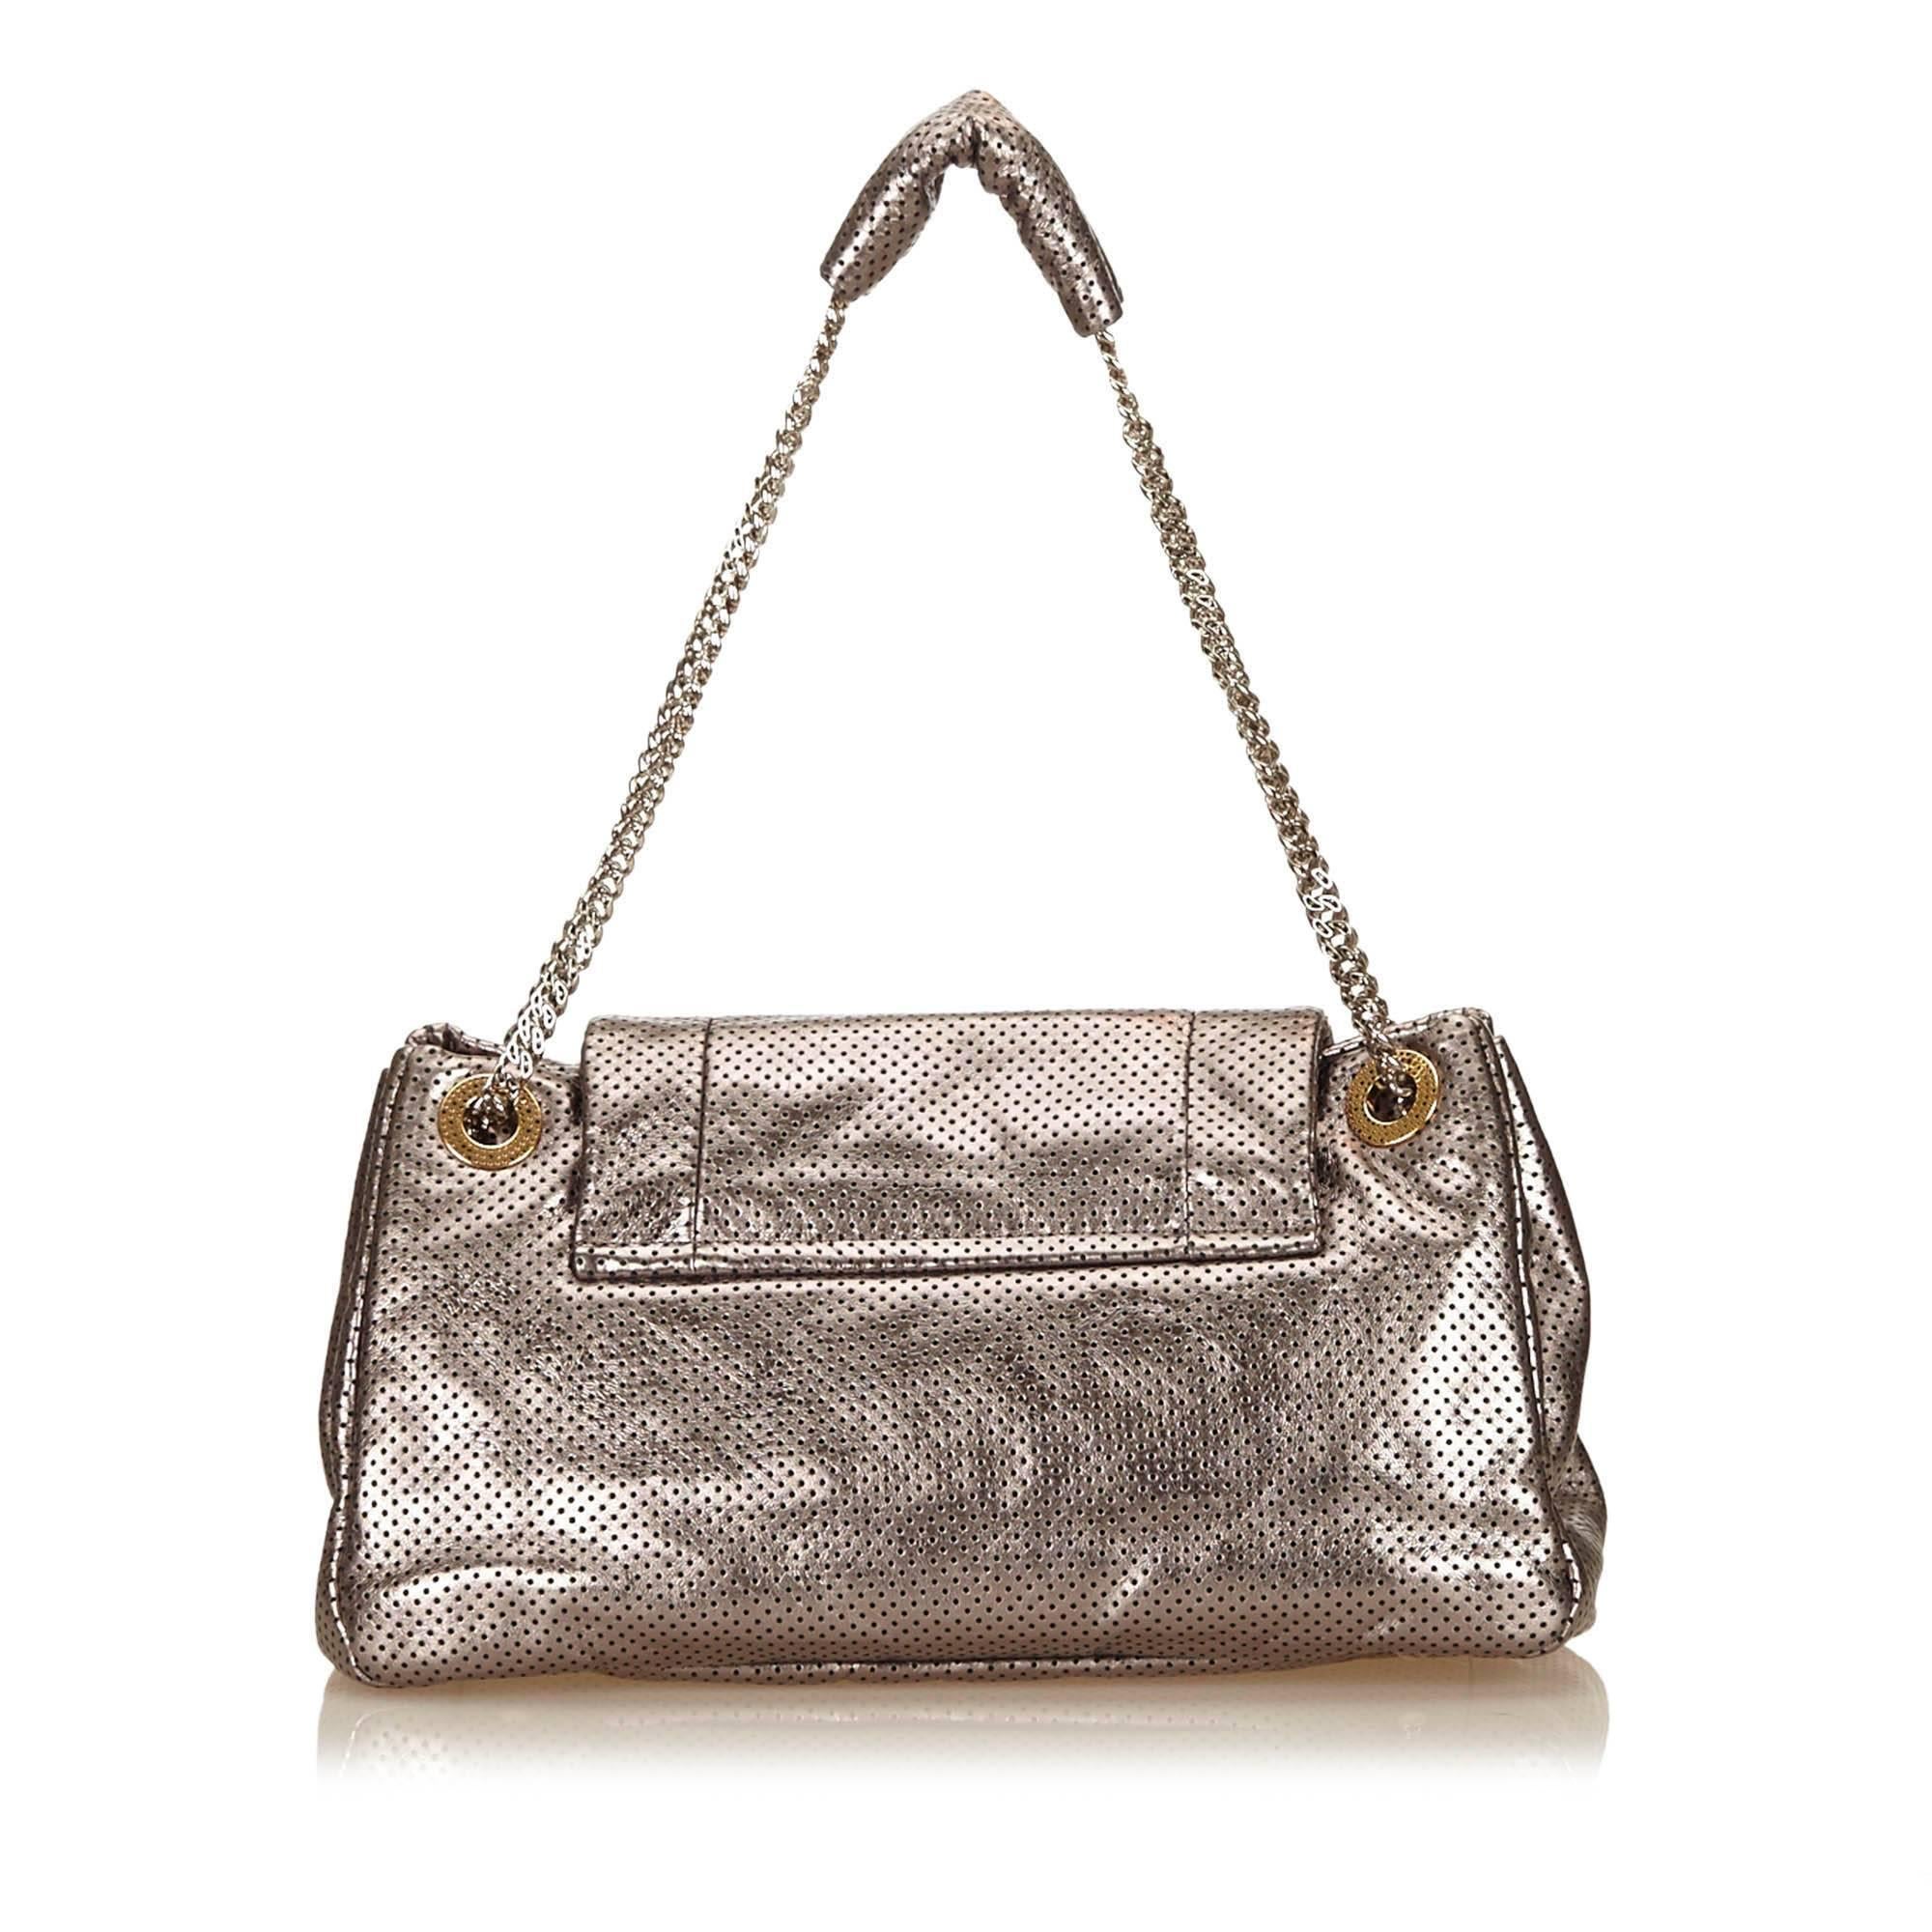 - This Chanel grey flap drill accordion 2.55 reissue shoulder bag features a perforated metallic leather body, silver-tone chains, a front flap with a twist lock closure, and interior zip and open pockets. 

- Made in France.

- Length: 34cm.